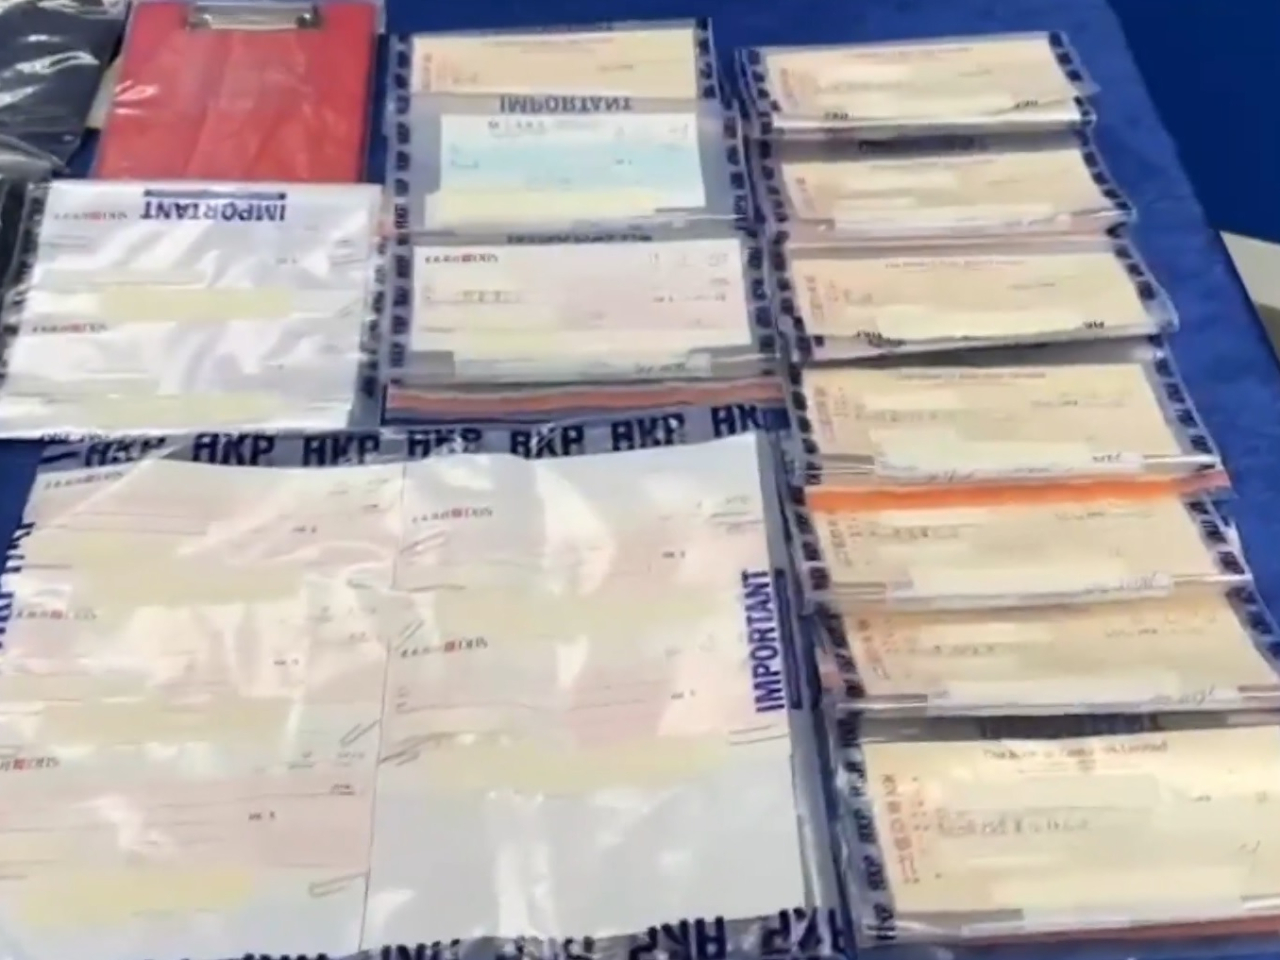 Two arrested after firms conned with fake deposits